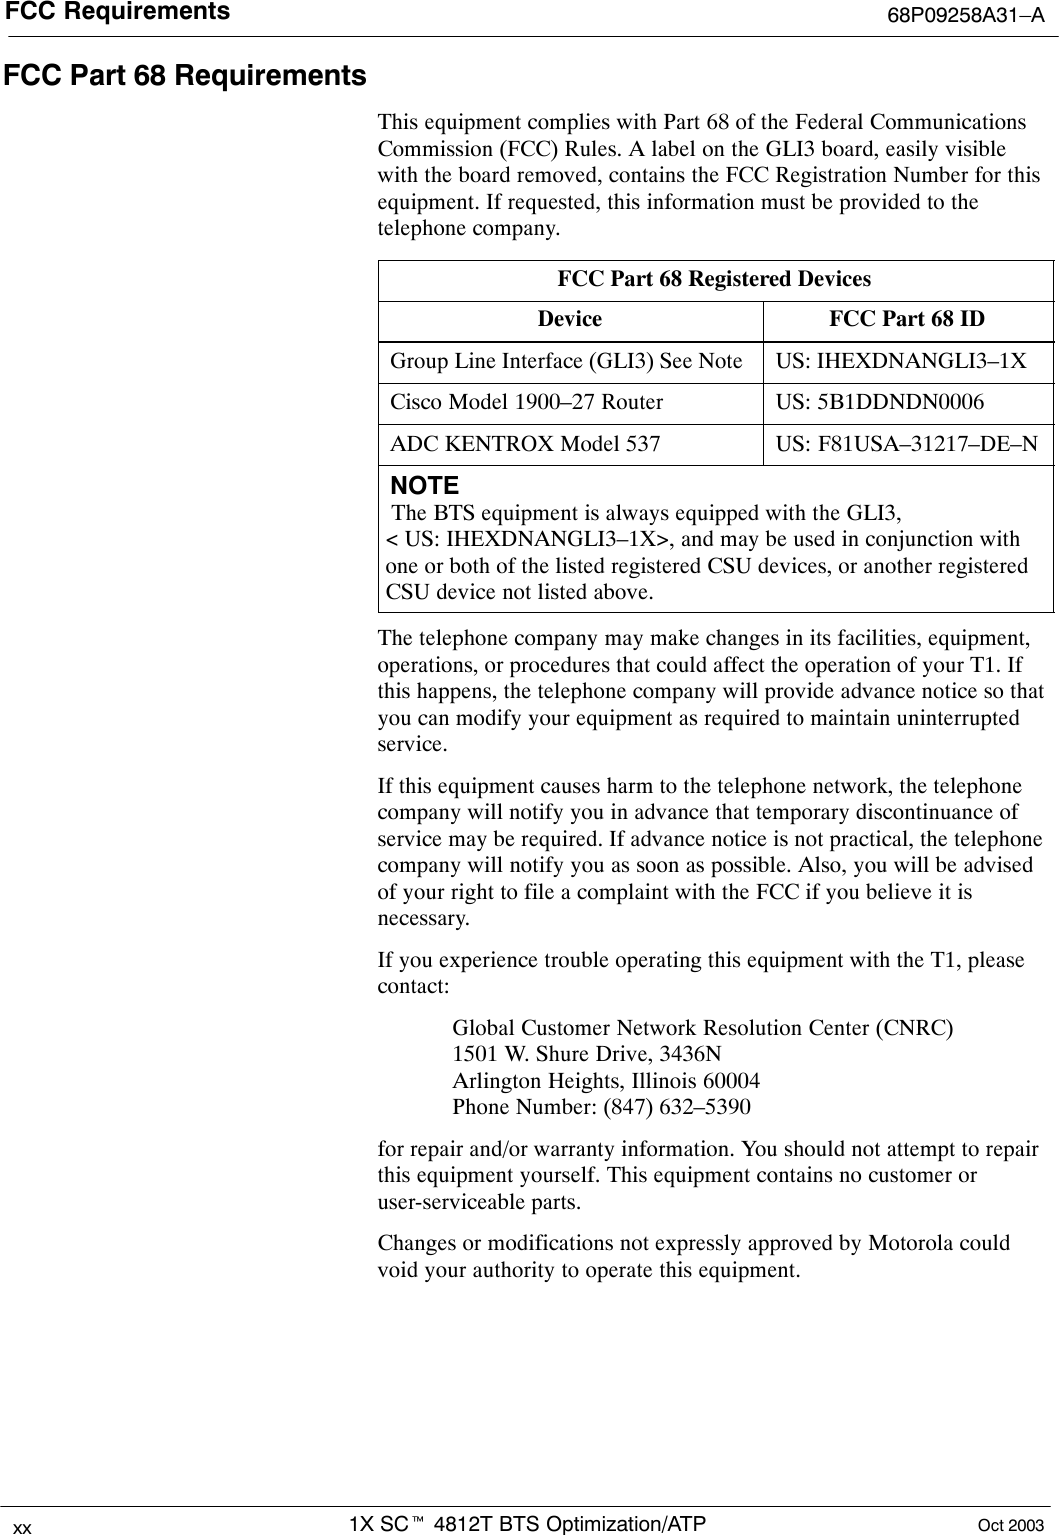 FCC Requirements 68P09258A31–A1X SCt 4812T BTS Optimization/ATPxx Oct 2003FCC Part 68 RequirementsThis equipment complies with Part 68 of the Federal CommunicationsCommission (FCC) Rules. A label on the GLI3 board, easily visiblewith the board removed, contains the FCC Registration Number for thisequipment. If requested, this information must be provided to thetelephone company.FCC Part 68 Registered DevicesDevice FCC Part 68 IDGroup Line Interface (GLI3) See Note US: IHEXDNANGLI3–1XCisco Model 1900–27 Router US: 5B1DDNDN0006ADC KENTROX Model 537 US: F81USA–31217–DE–NNOTE The BTS equipment is always equipped with the GLI3, &lt; US: IHEXDNANGLI3–1X&gt;, and may be used in conjunction withone or both of the listed registered CSU devices, or another registeredCSU device not listed above.The telephone company may make changes in its facilities, equipment,operations, or procedures that could affect the operation of your T1. Ifthis happens, the telephone company will provide advance notice so thatyou can modify your equipment as required to maintain uninterruptedservice.If this equipment causes harm to the telephone network, the telephonecompany will notify you in advance that temporary discontinuance ofservice may be required. If advance notice is not practical, the telephonecompany will notify you as soon as possible. Also, you will be advisedof your right to file a complaint with the FCC if you believe it isnecessary.If you experience trouble operating this equipment with the T1, pleasecontact:Global Customer Network Resolution Center (CNRC)1501 W. Shure Drive, 3436NArlington Heights, Illinois 60004Phone Number: (847) 632–5390for repair and/or warranty information. You should not attempt to repairthis equipment yourself. This equipment contains no customer oruser-serviceable parts.Changes or modifications not expressly approved by Motorola couldvoid your authority to operate this equipment.